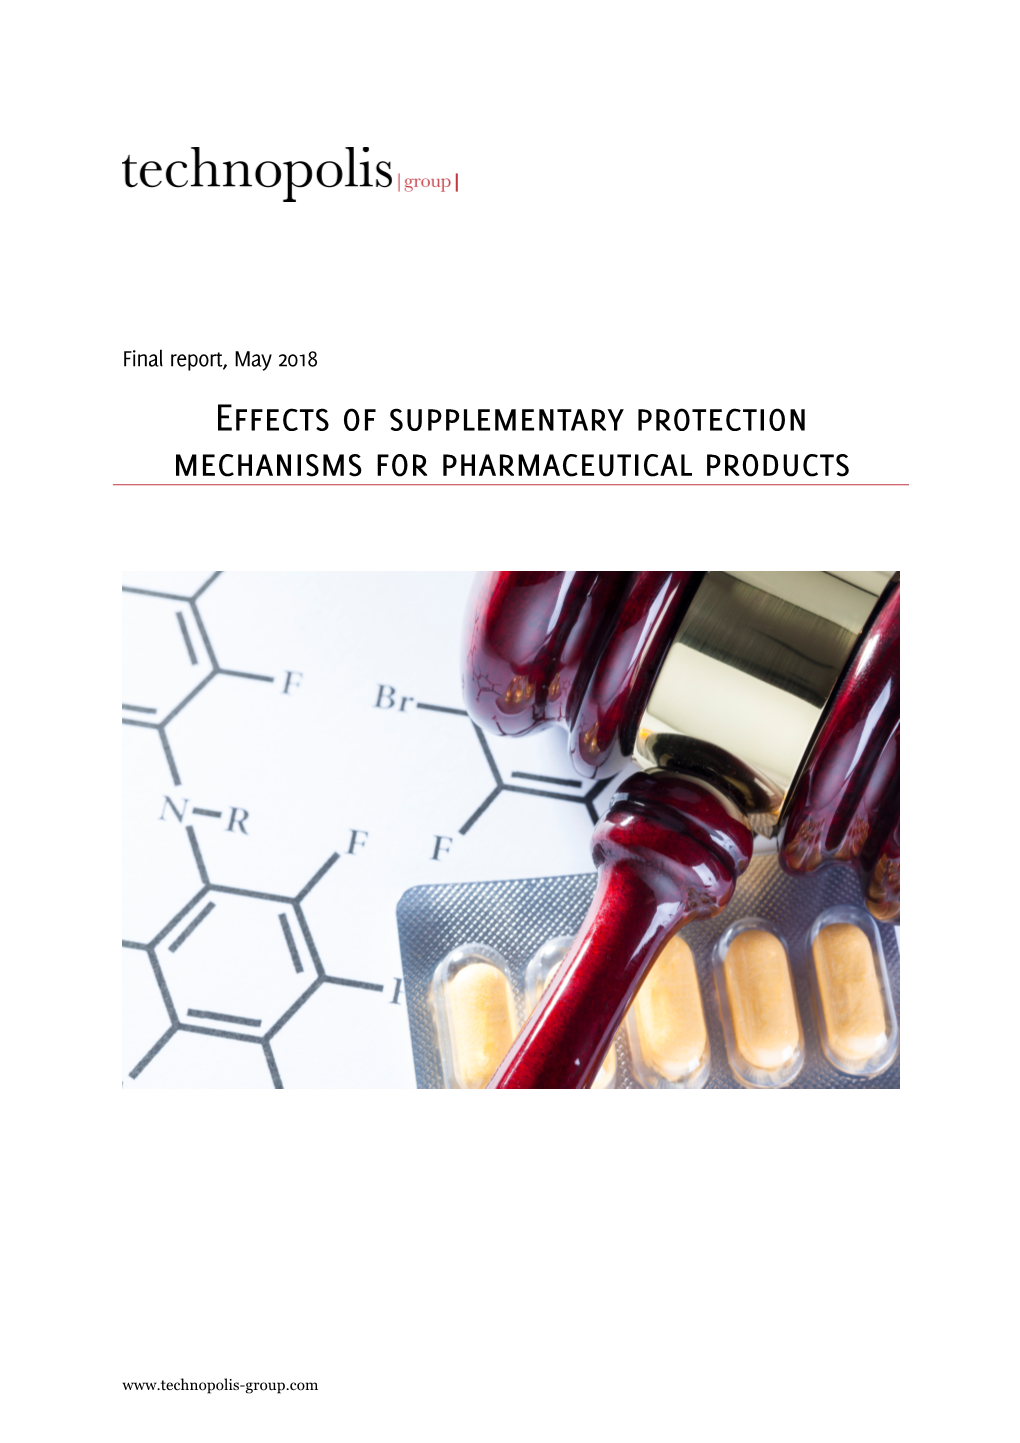 Effects of Supplementary Protection Mechanisms for Pharmaceutical Products